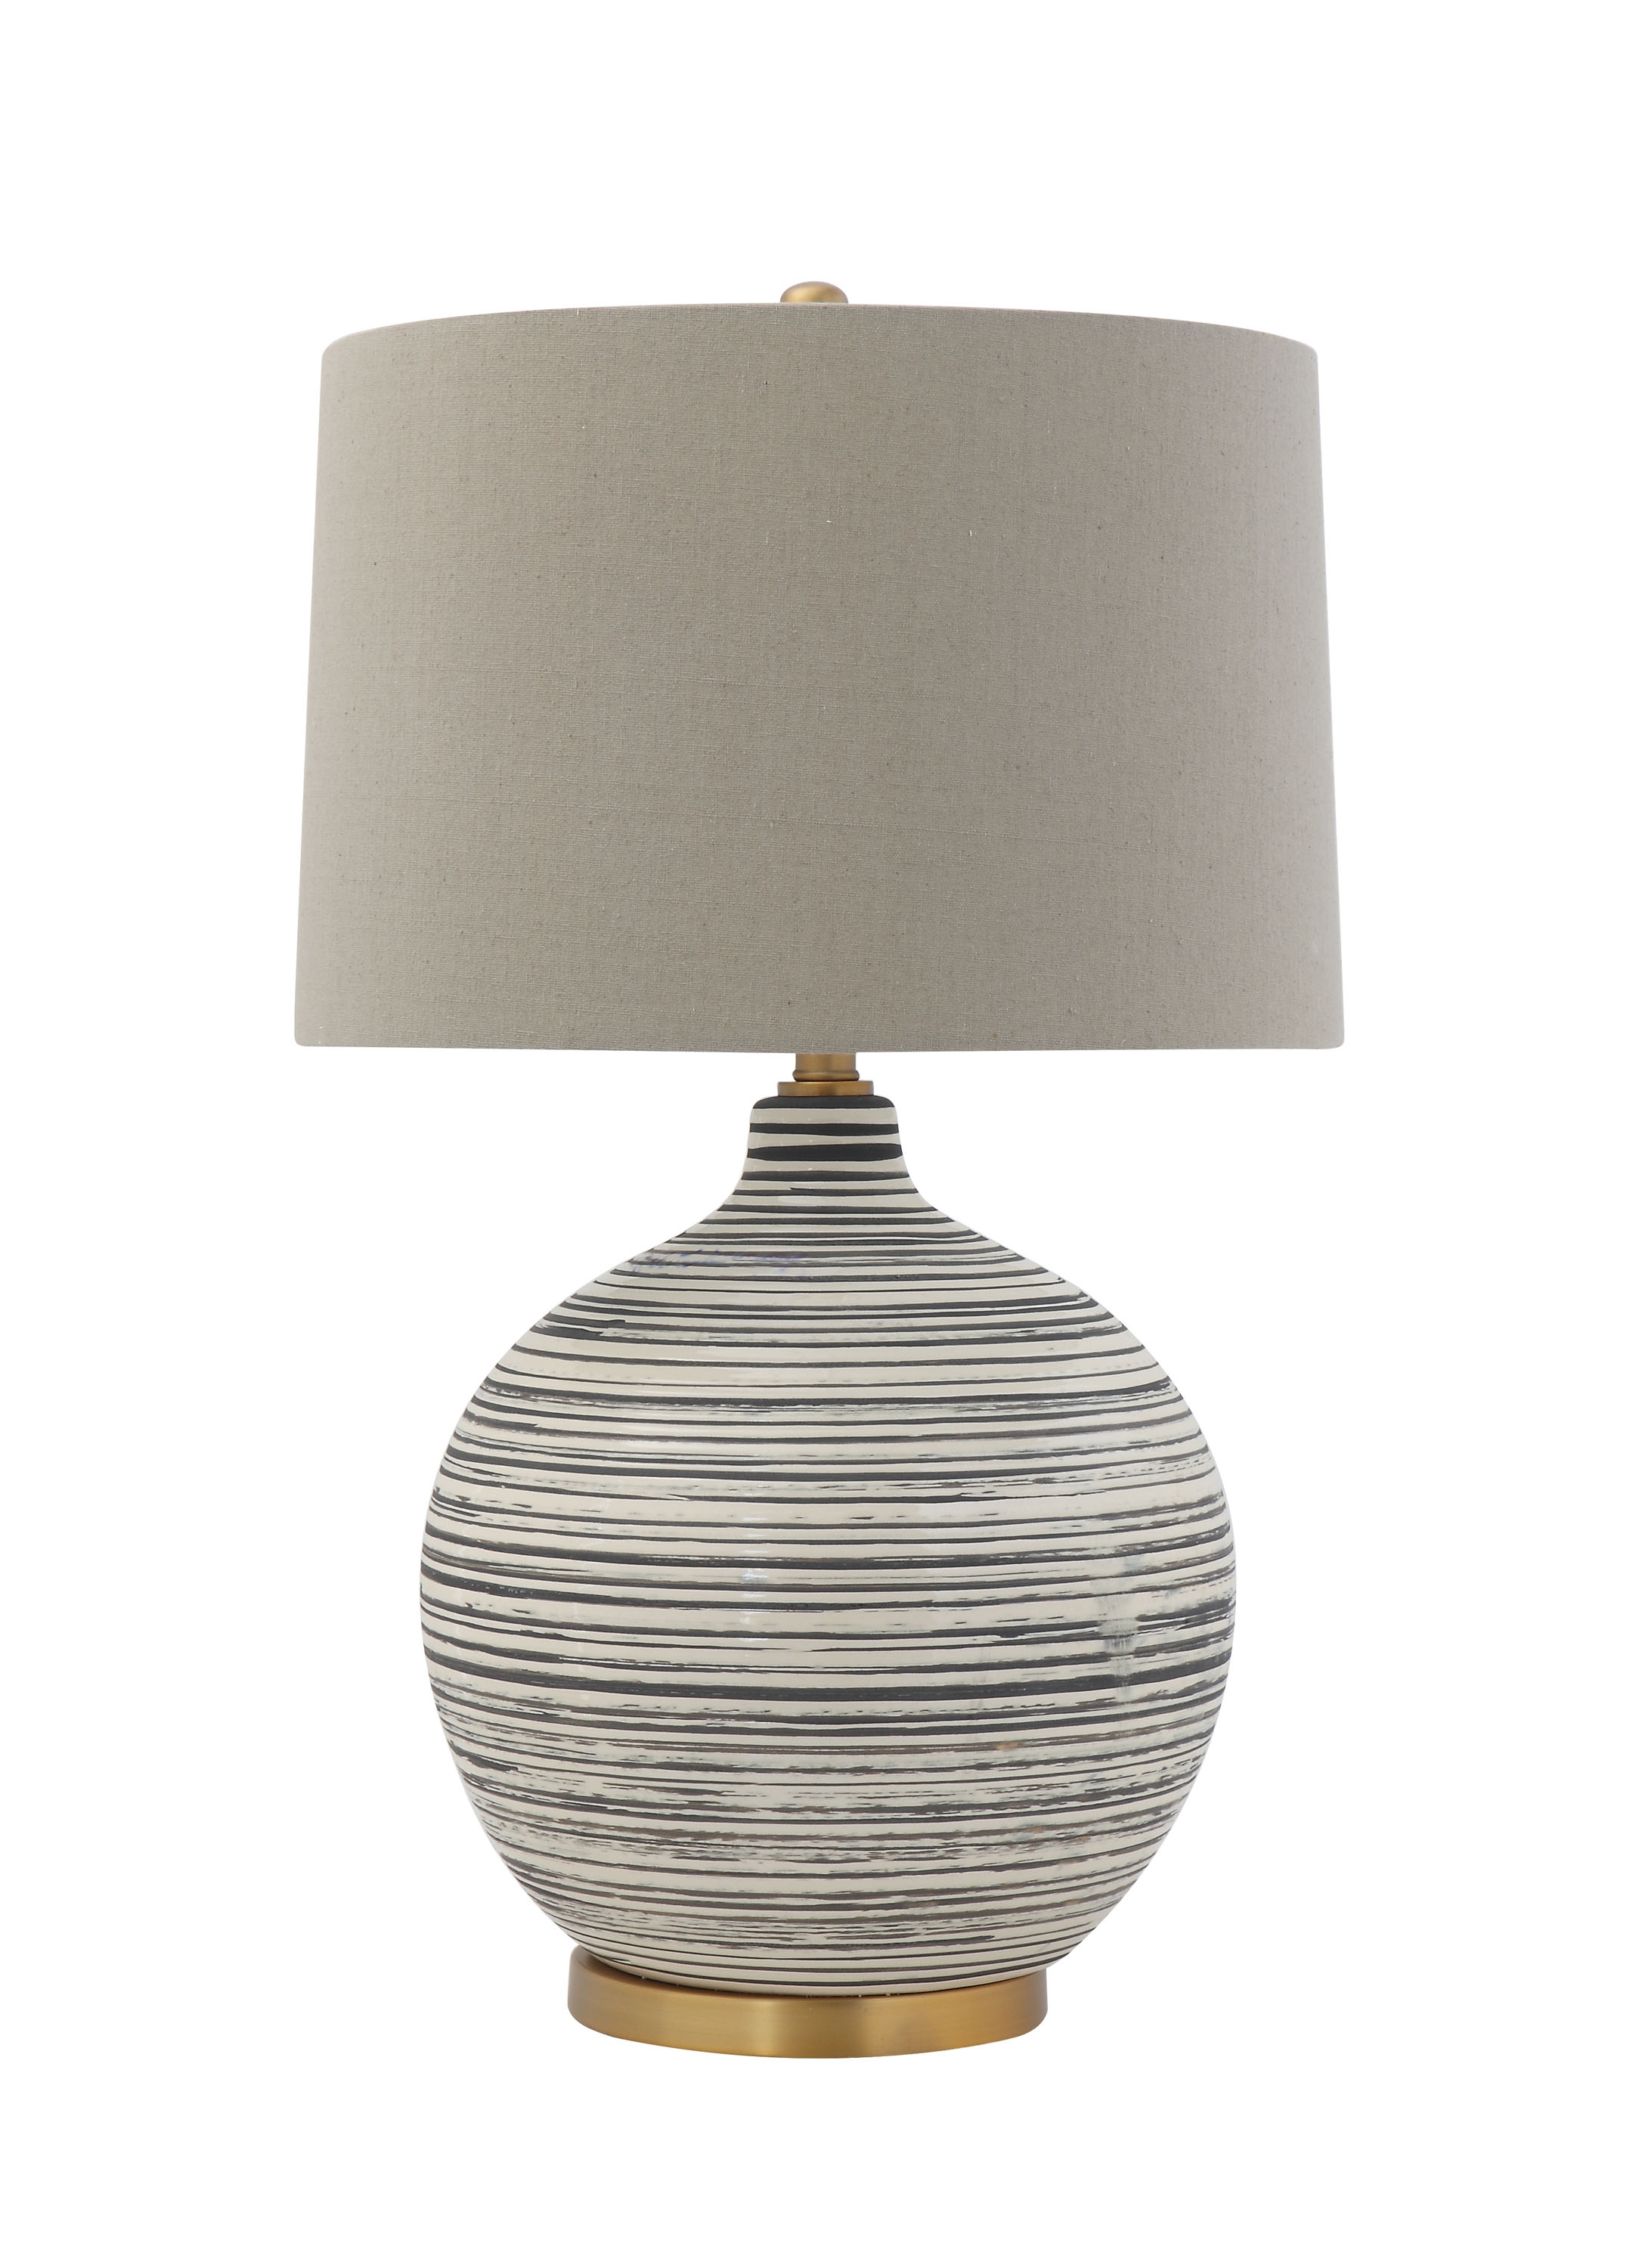 Textured Black & White Striped Ceramic Table Lamp with Grey Linen Shade - Image 0